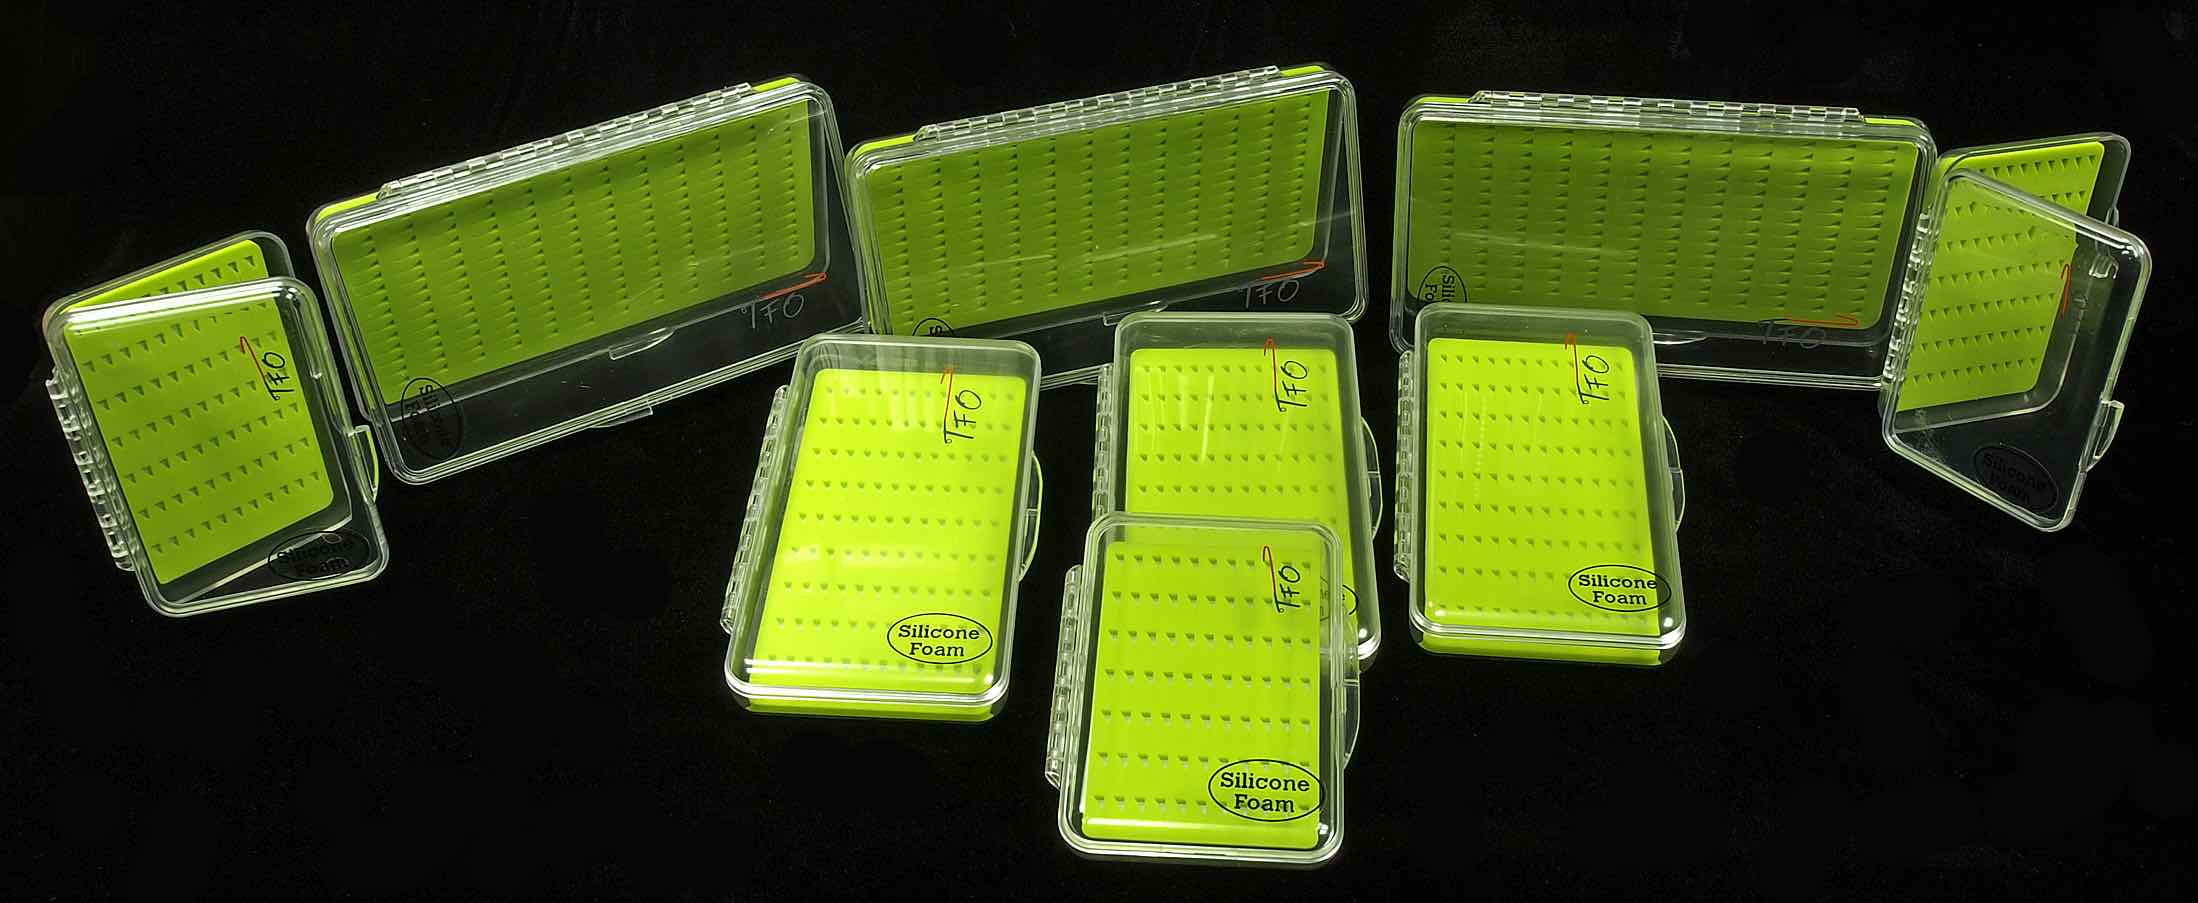 TFO Clear Fly Box With Slit Foam Large Holds Flies, Fly Boxes